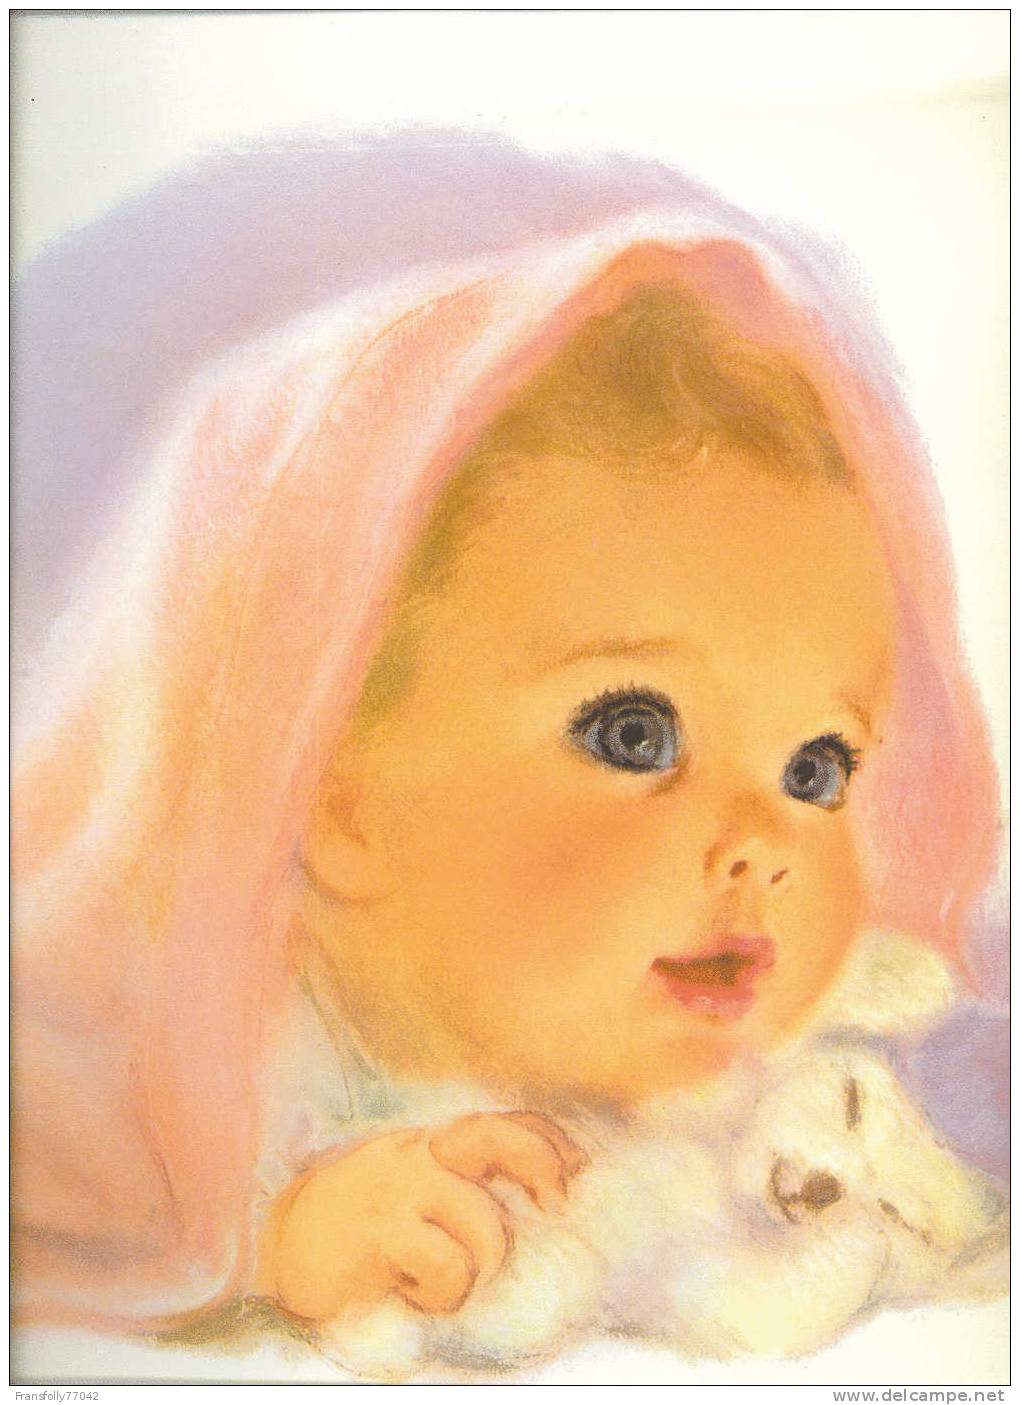 LITHOGRAPH OF Beautiful BABY GIRL By FRANCES HOOK For NORTHERN PAPER MILLS Advertising 1960 - Lithographies